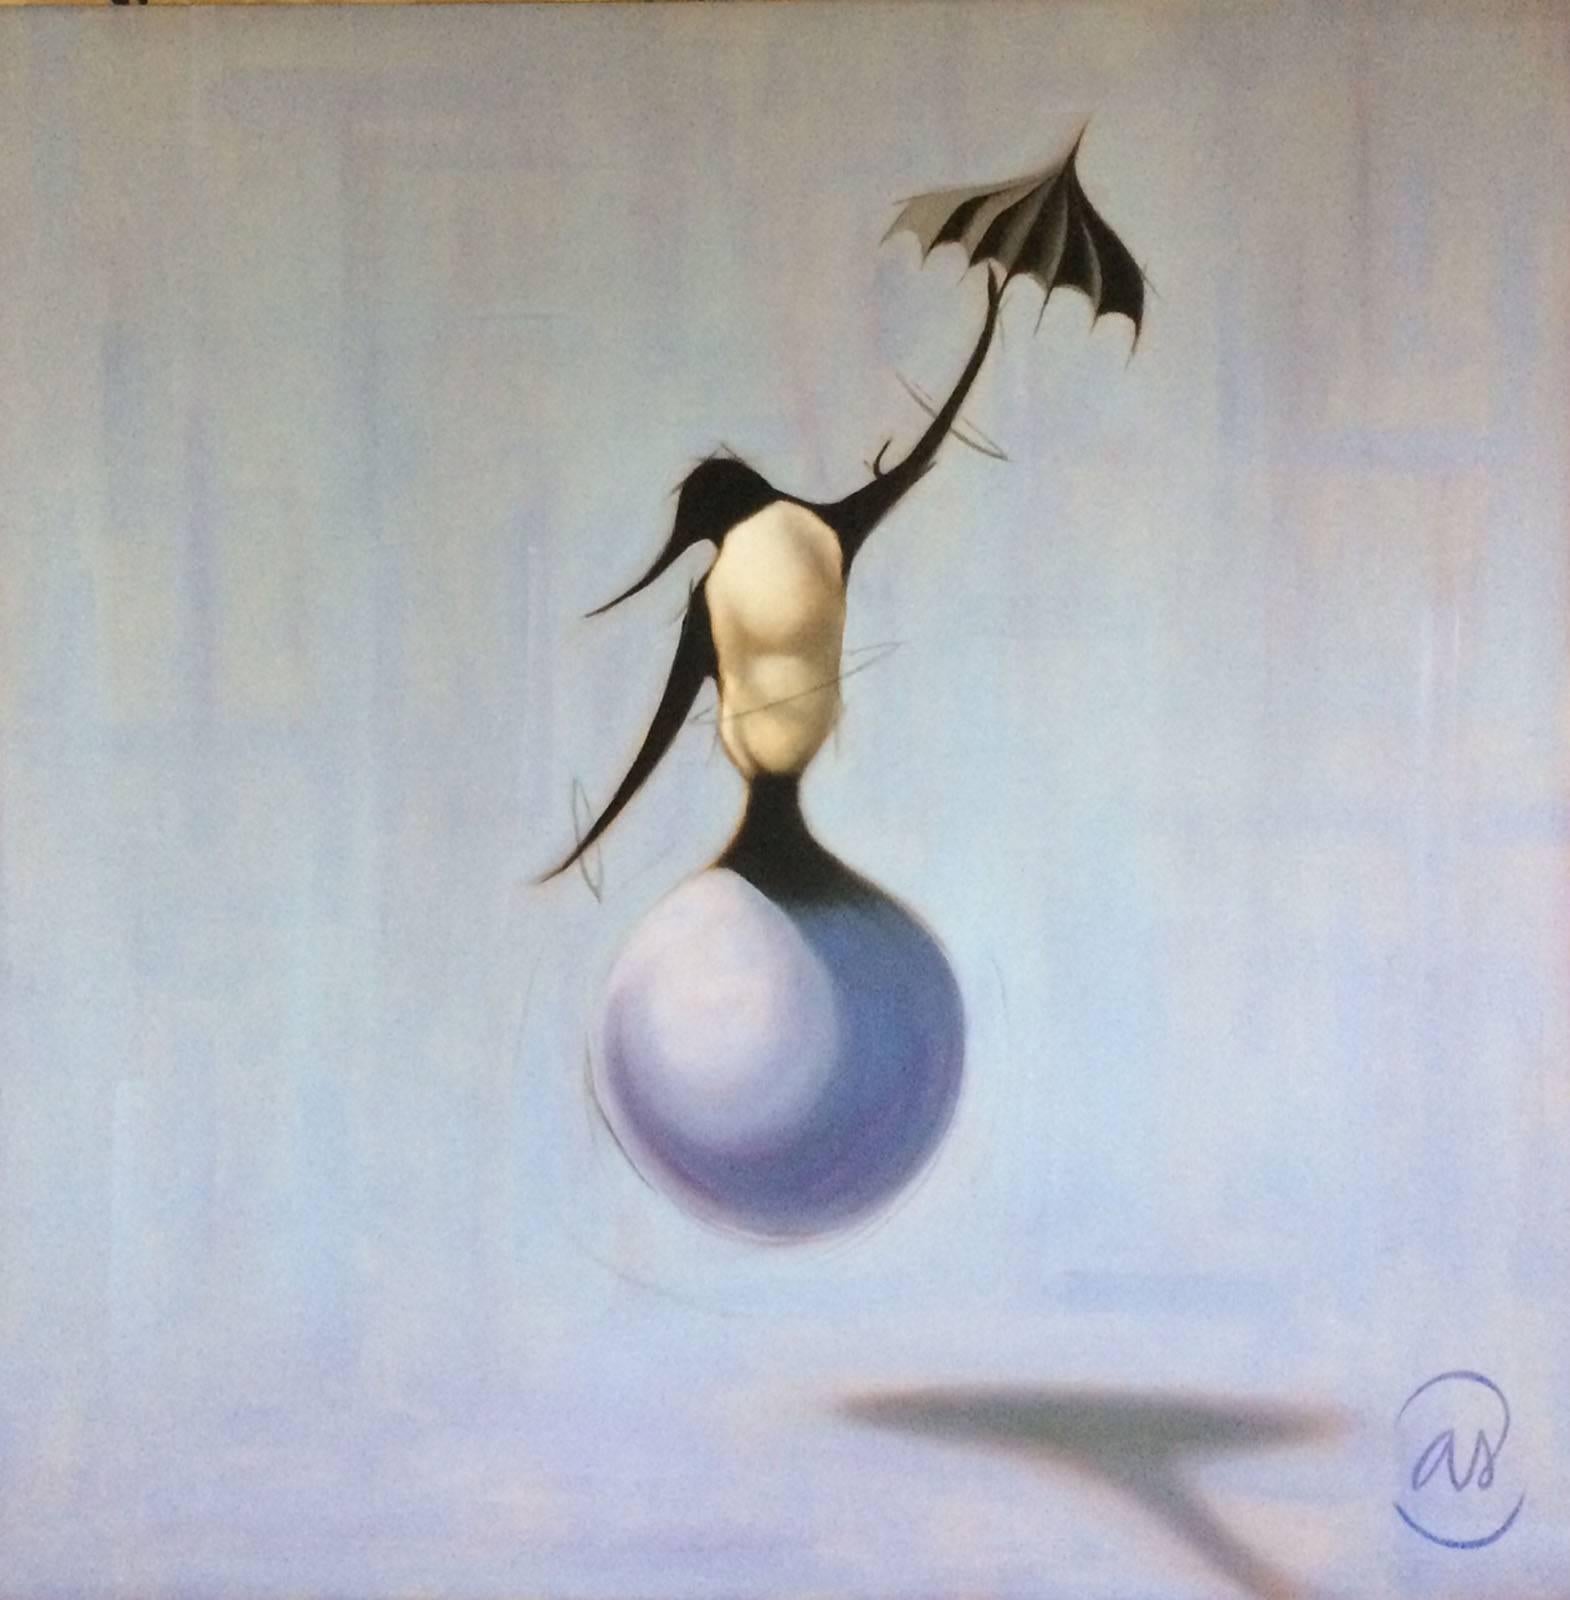 OIl painting on canvas, with a pale lavender and pale blue background, with a purple ball, holding a little penguin, and the penguin is holding a black umbrella. Ashley Surber's paintings are a window into a whimsical and humorous world. Through her